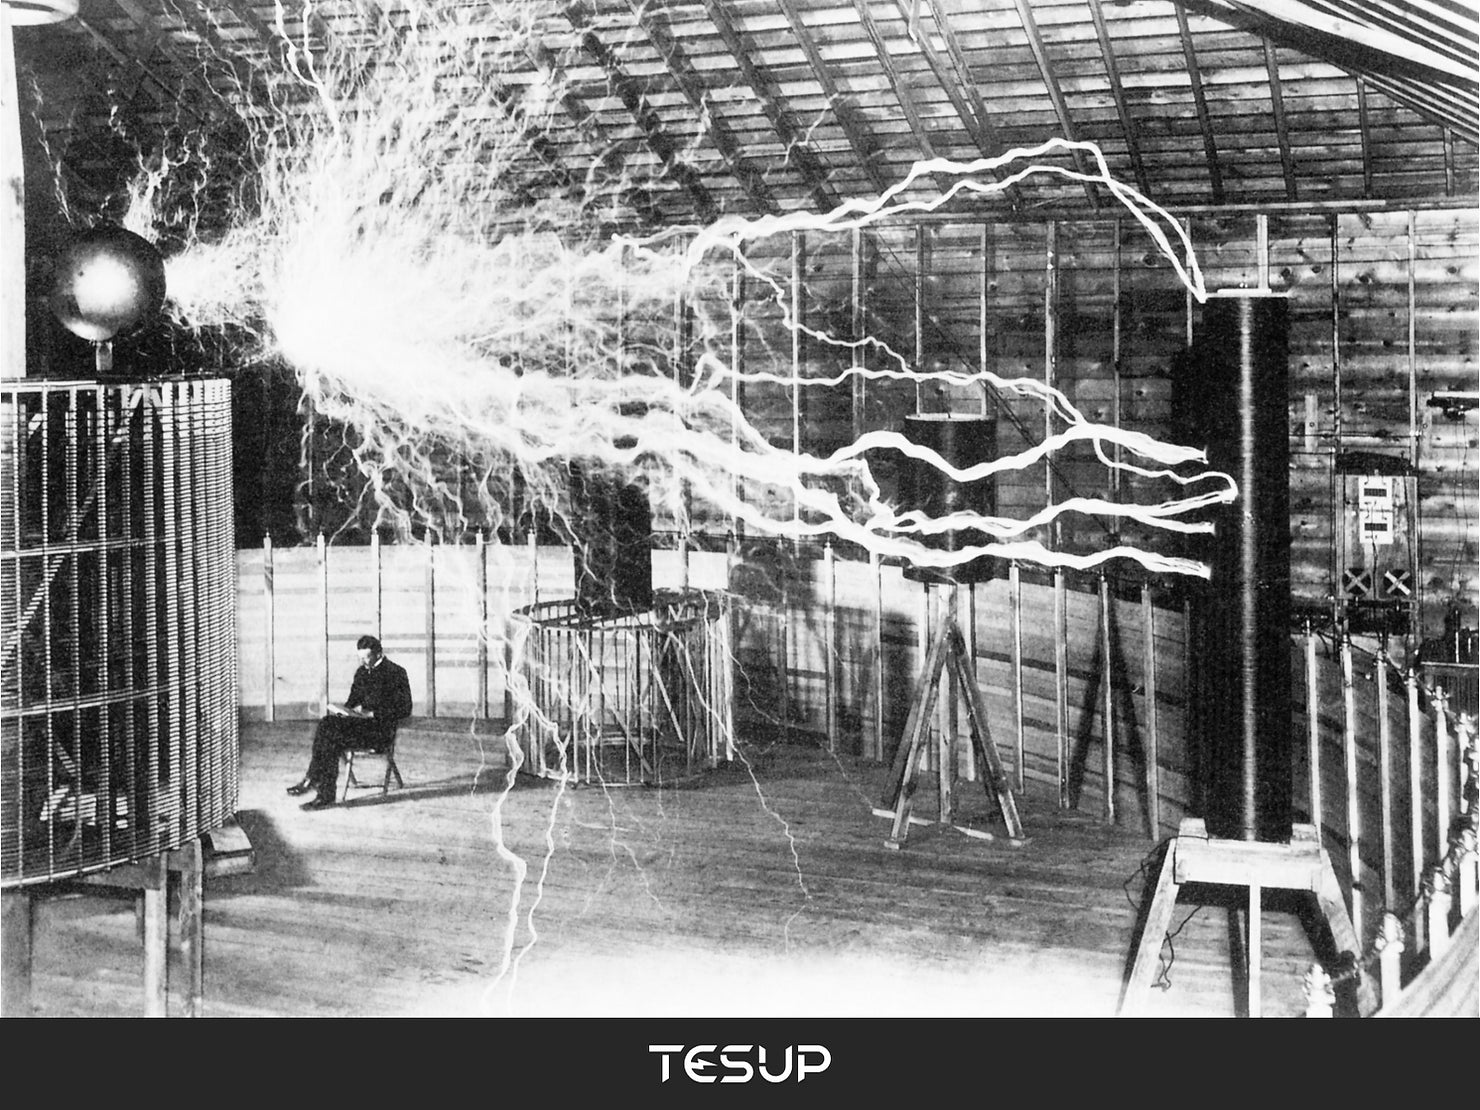 Nikola Tesla: The Visionary Inventor Who Foresaw the Potential of Renewable Energy